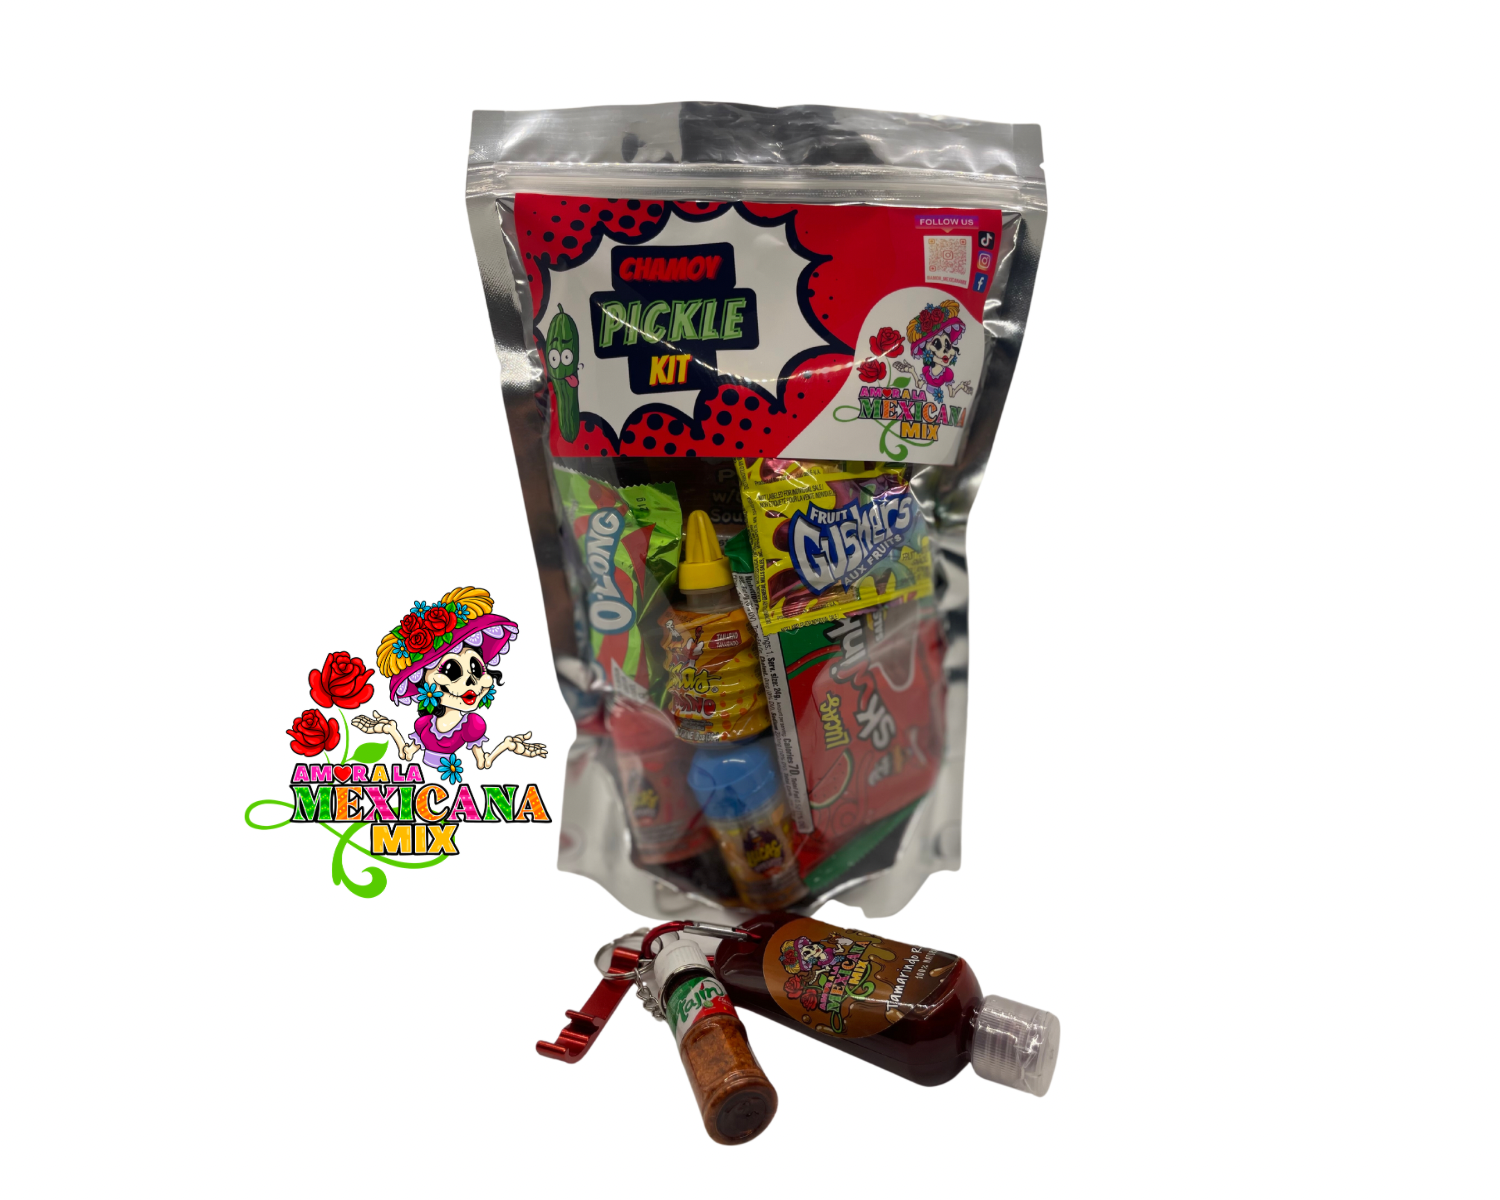 OG Chamoy Pickle Kit - Rustito's Dulces